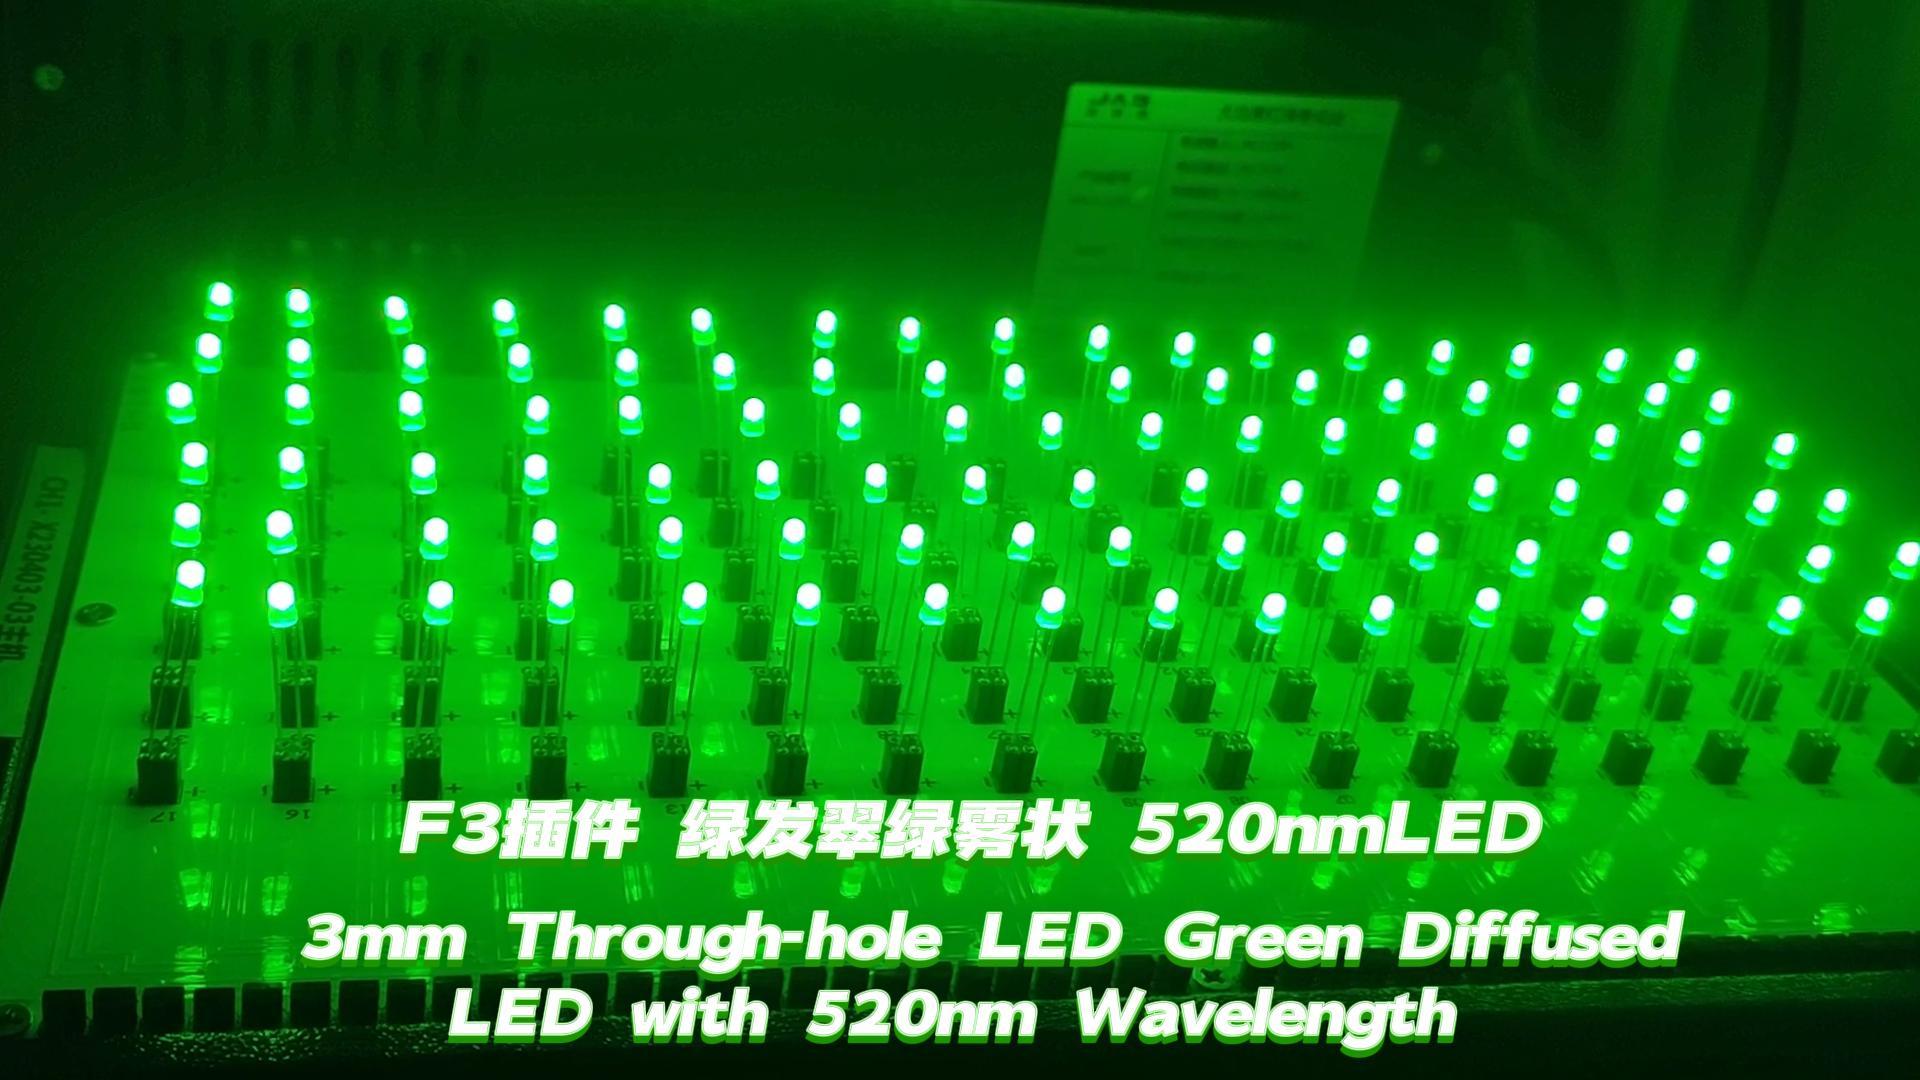 3 mm reikäinen LED Green Diffunded LED